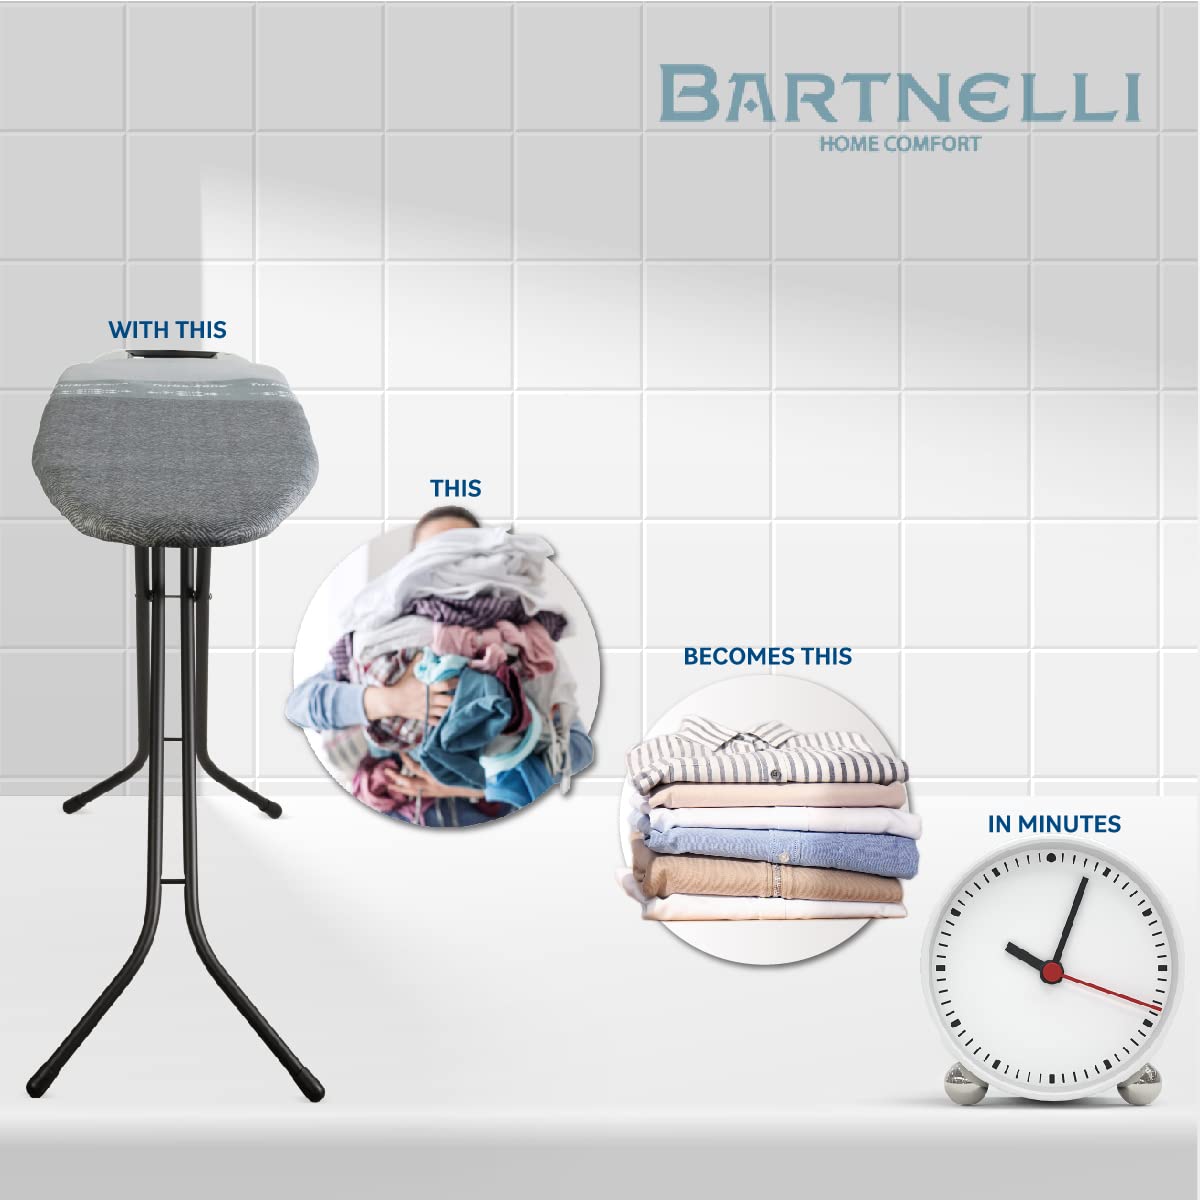 Bartnelli Classic Ironing Board with New Patent Technology | Made in Europe Iron Board with Patent Fast-Glide Zone, 4 Layer Cover & Pad, Height Adjustable, Safety Iron Rest, 4 Premium Steel Legs